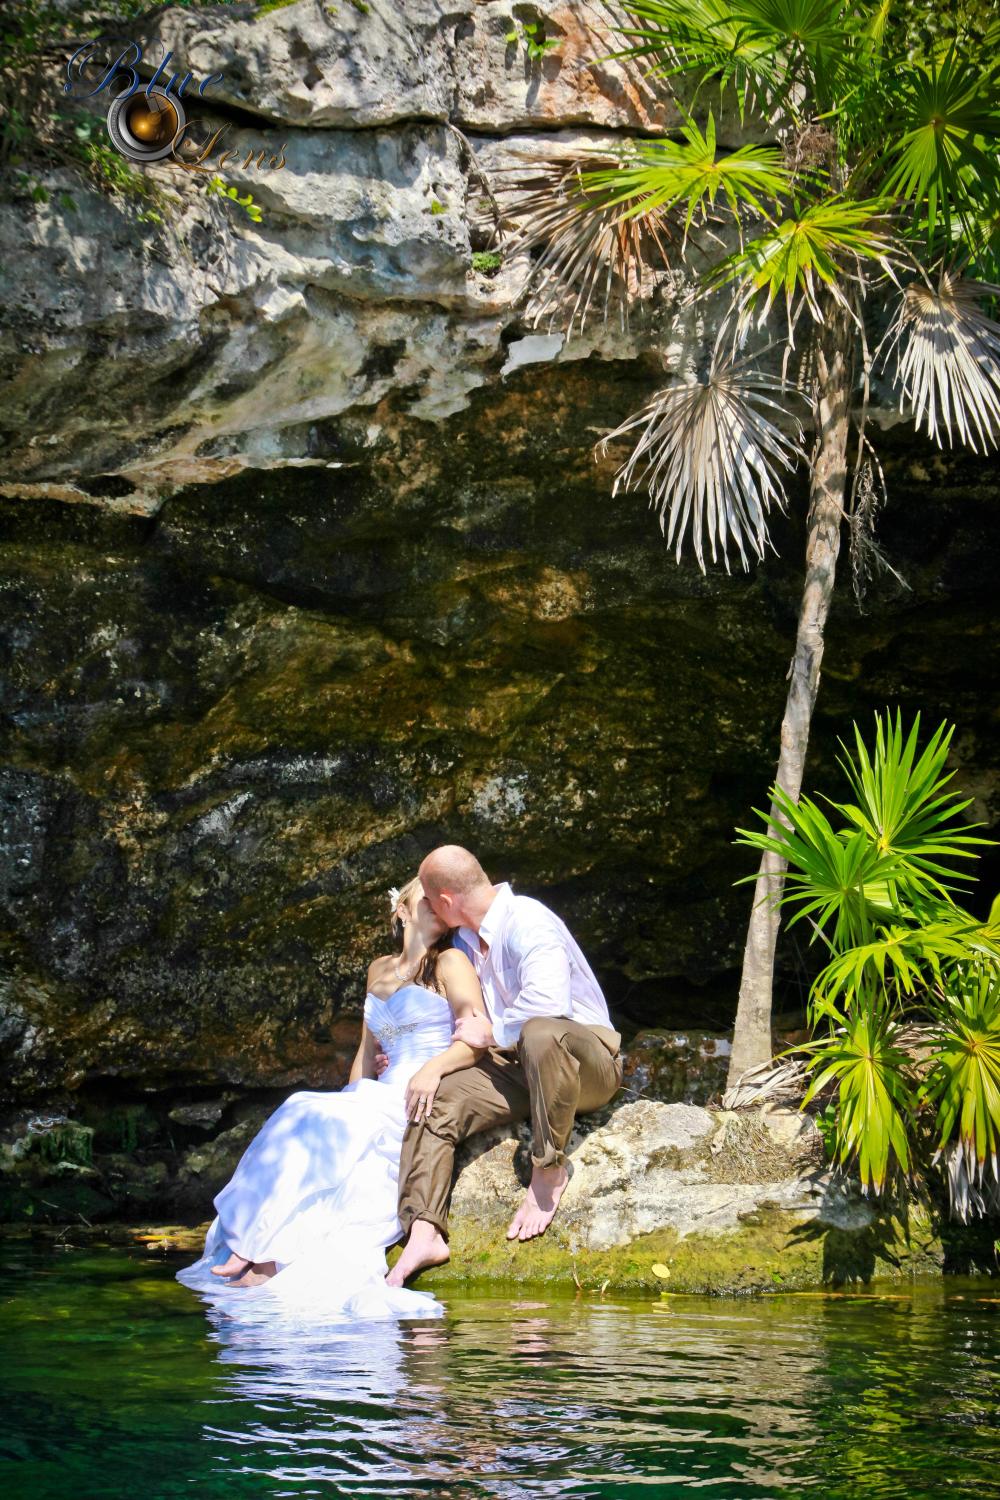 What a great Trash the Dress Session at the Cenote!!!